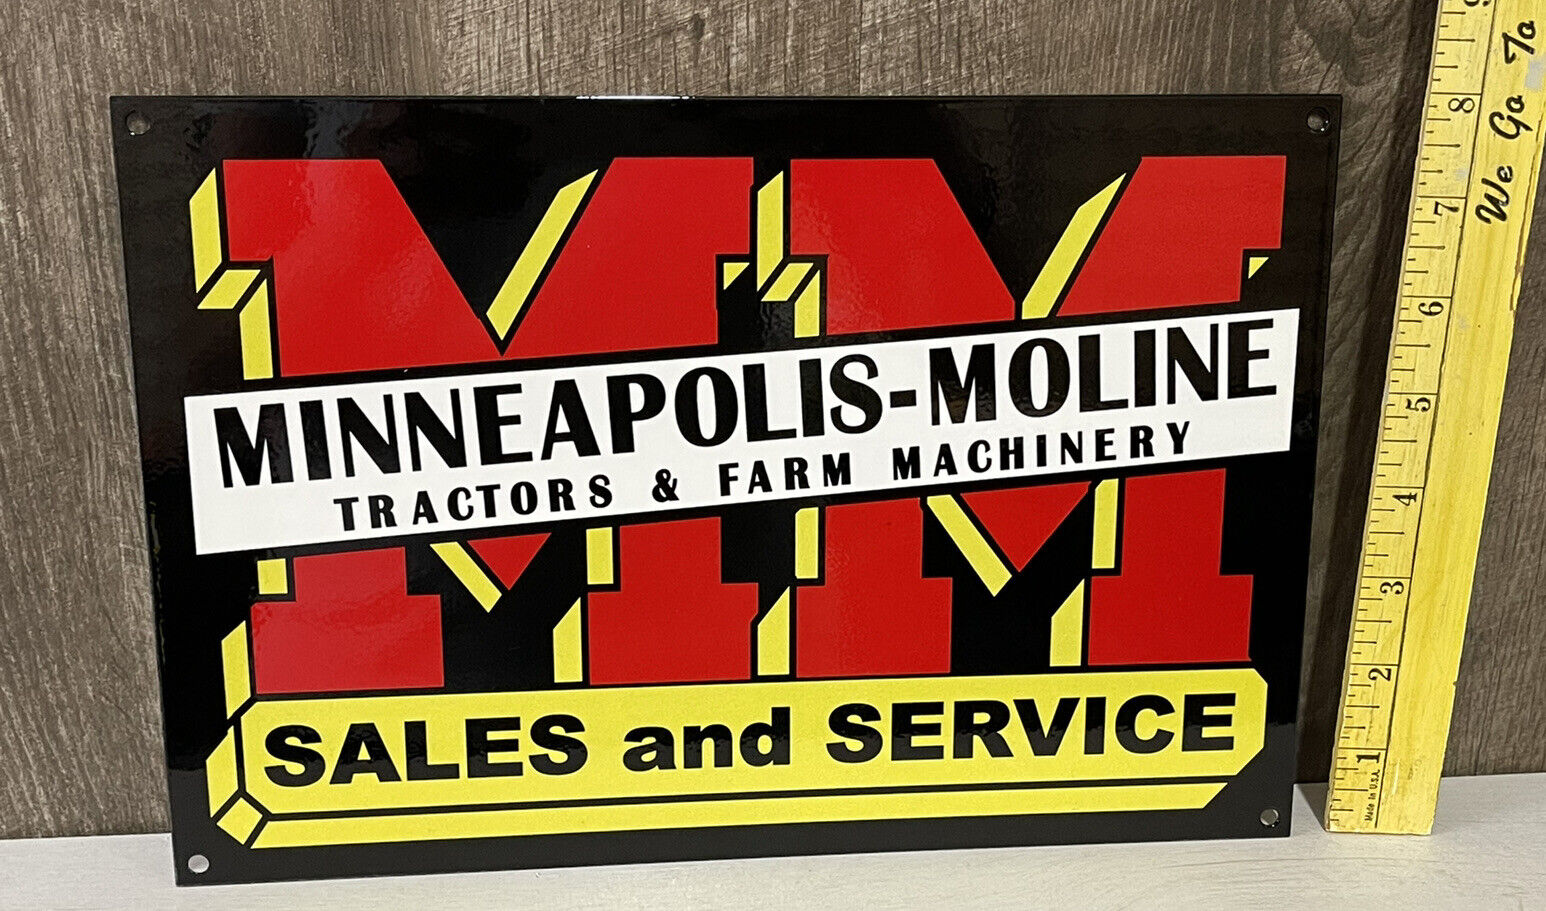 MM Minneapolis Moline Metal Sign Tractor Diesel Farm Engine Agriculture Gas Oil